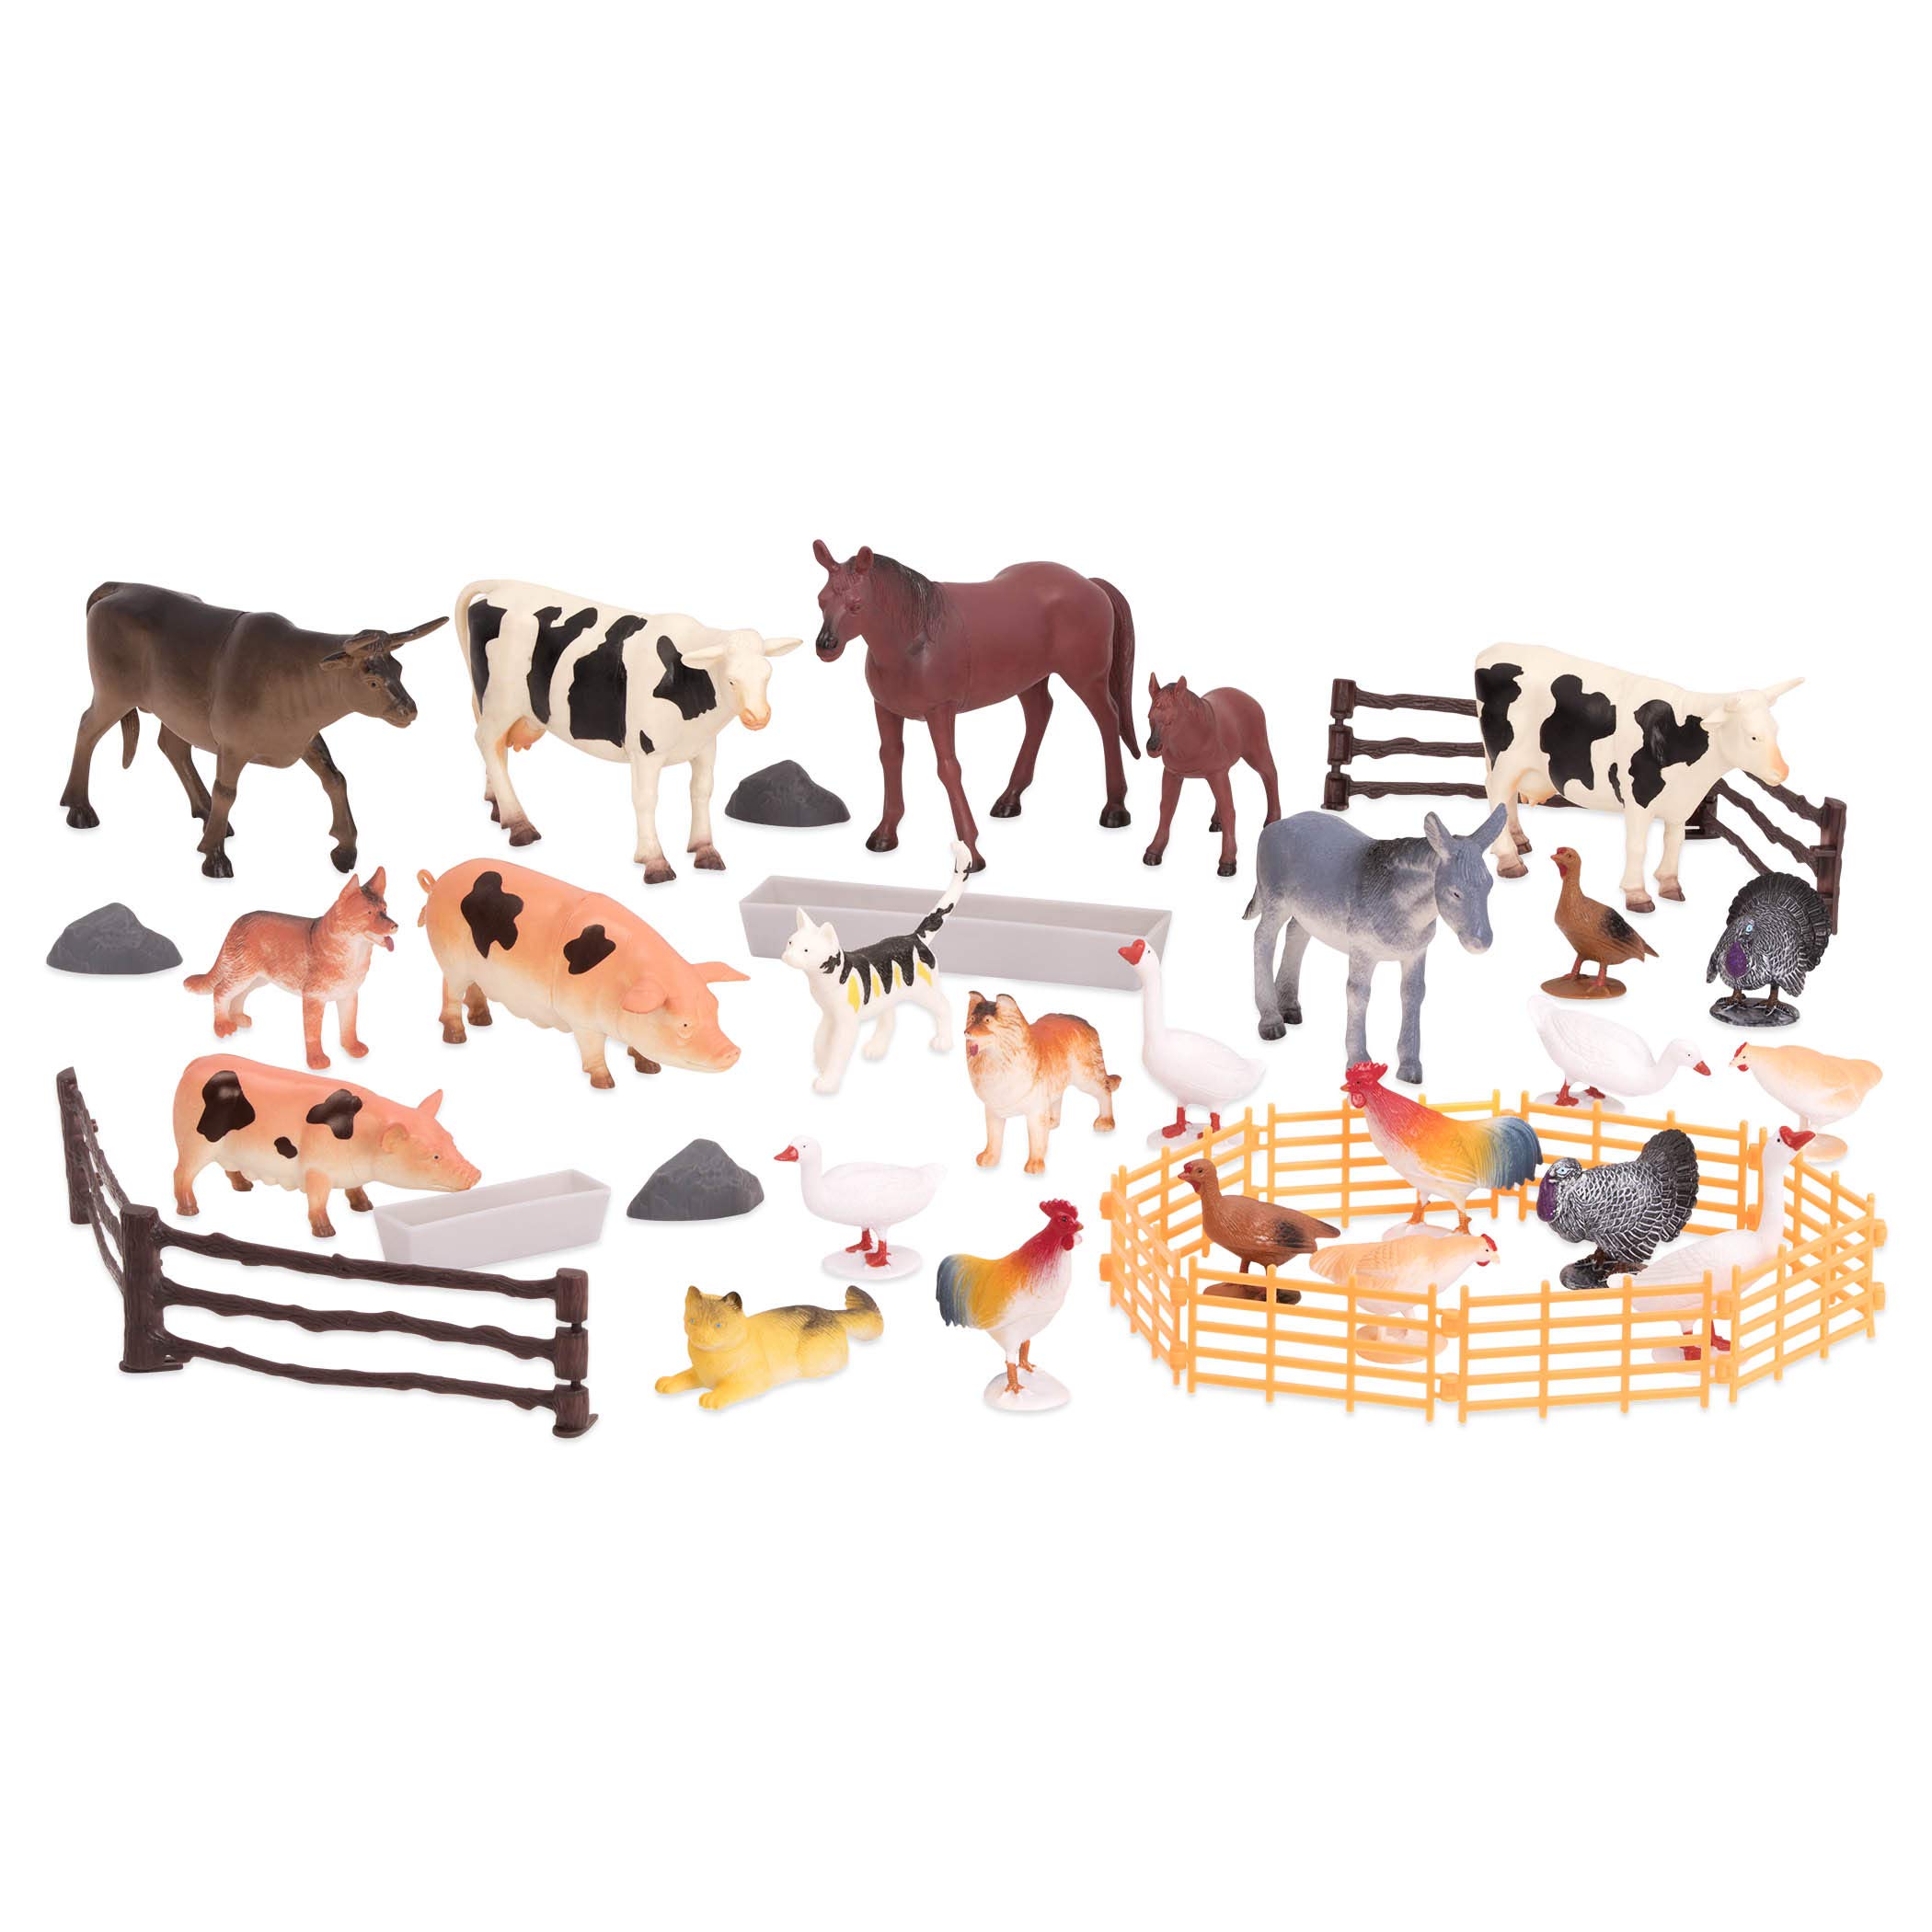 Mua Terra by Battat AN2802Z 60-Piece Animal Figures Collection Farm Animals  Set - Cows, Pigs, Chickens, Horses, Dogs, Cats and More - Toy from 3 Years  trên Amazon Đức chính hãng 2023 | Giaonhan247